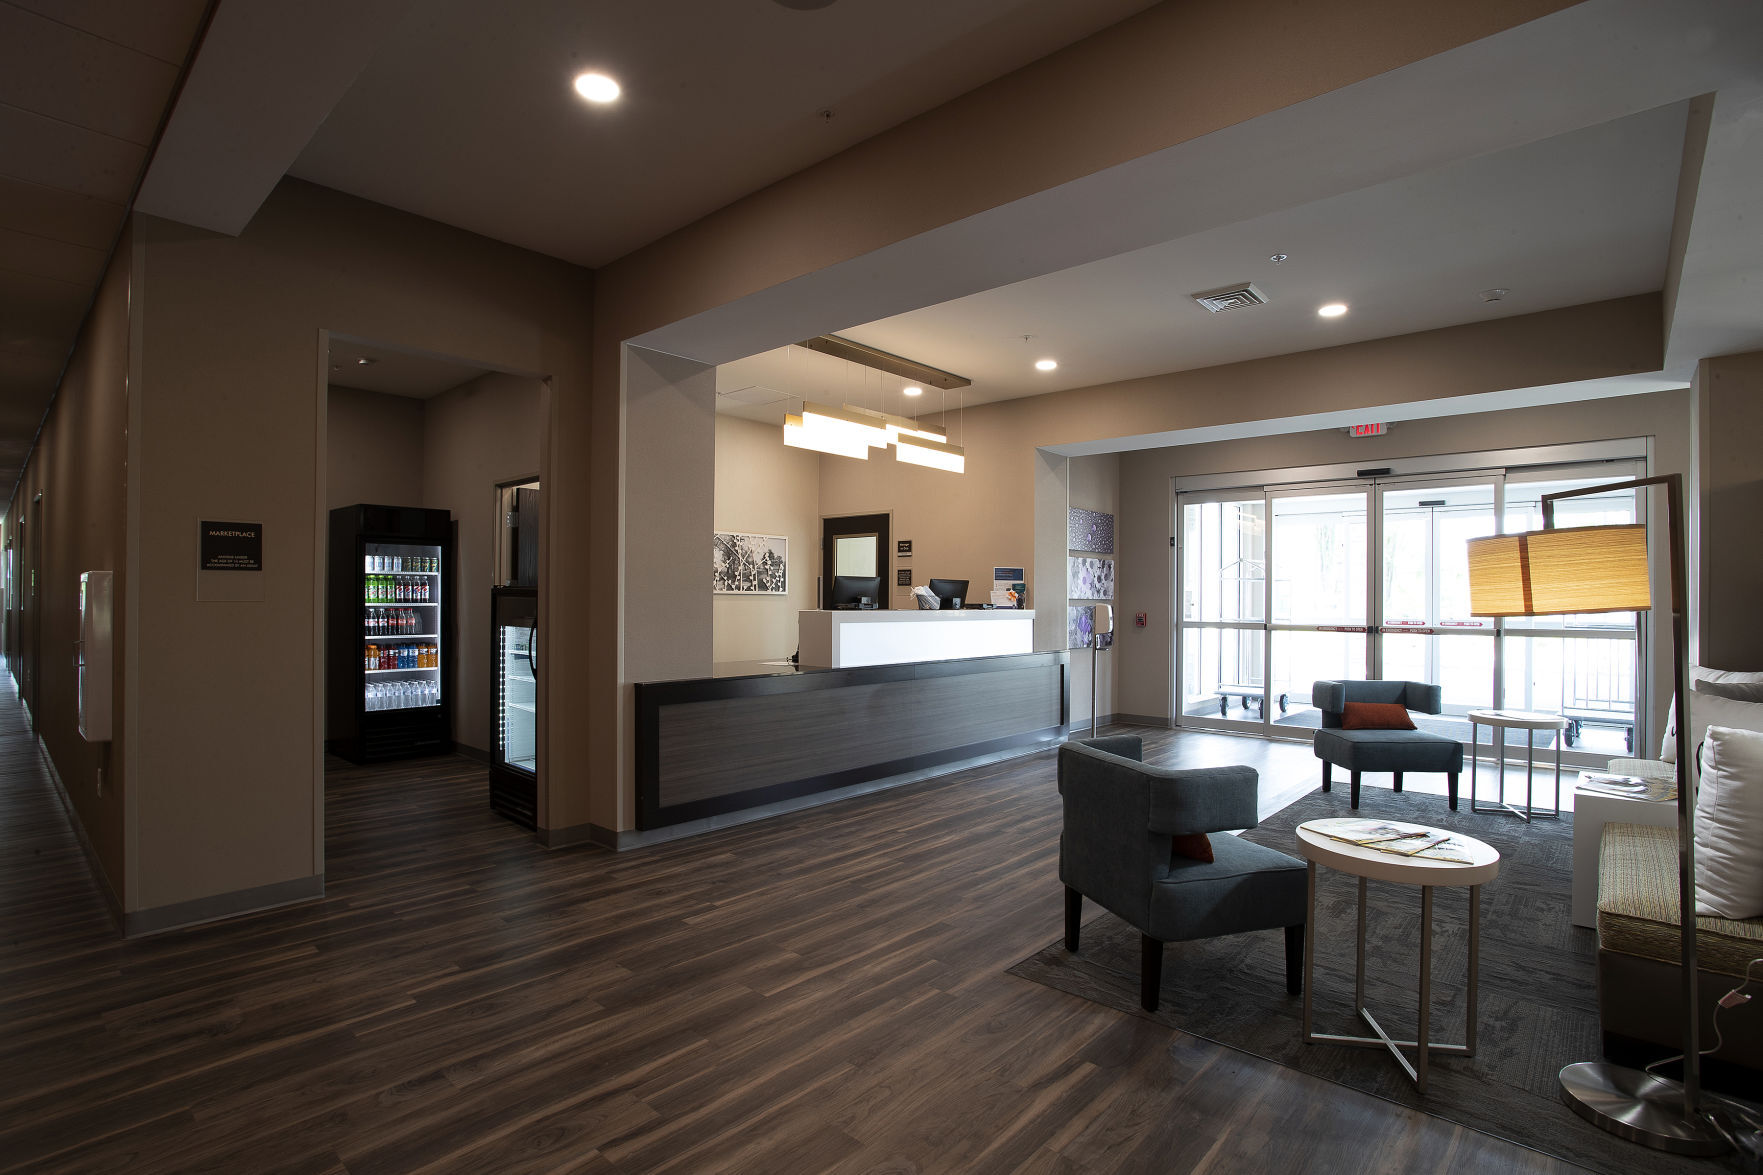 The entry and front desk of the new Sleep Inn in Lancaster, WI., on Tuesday, June 8, 2021. PHOTO CREDIT: Stephen Gassman